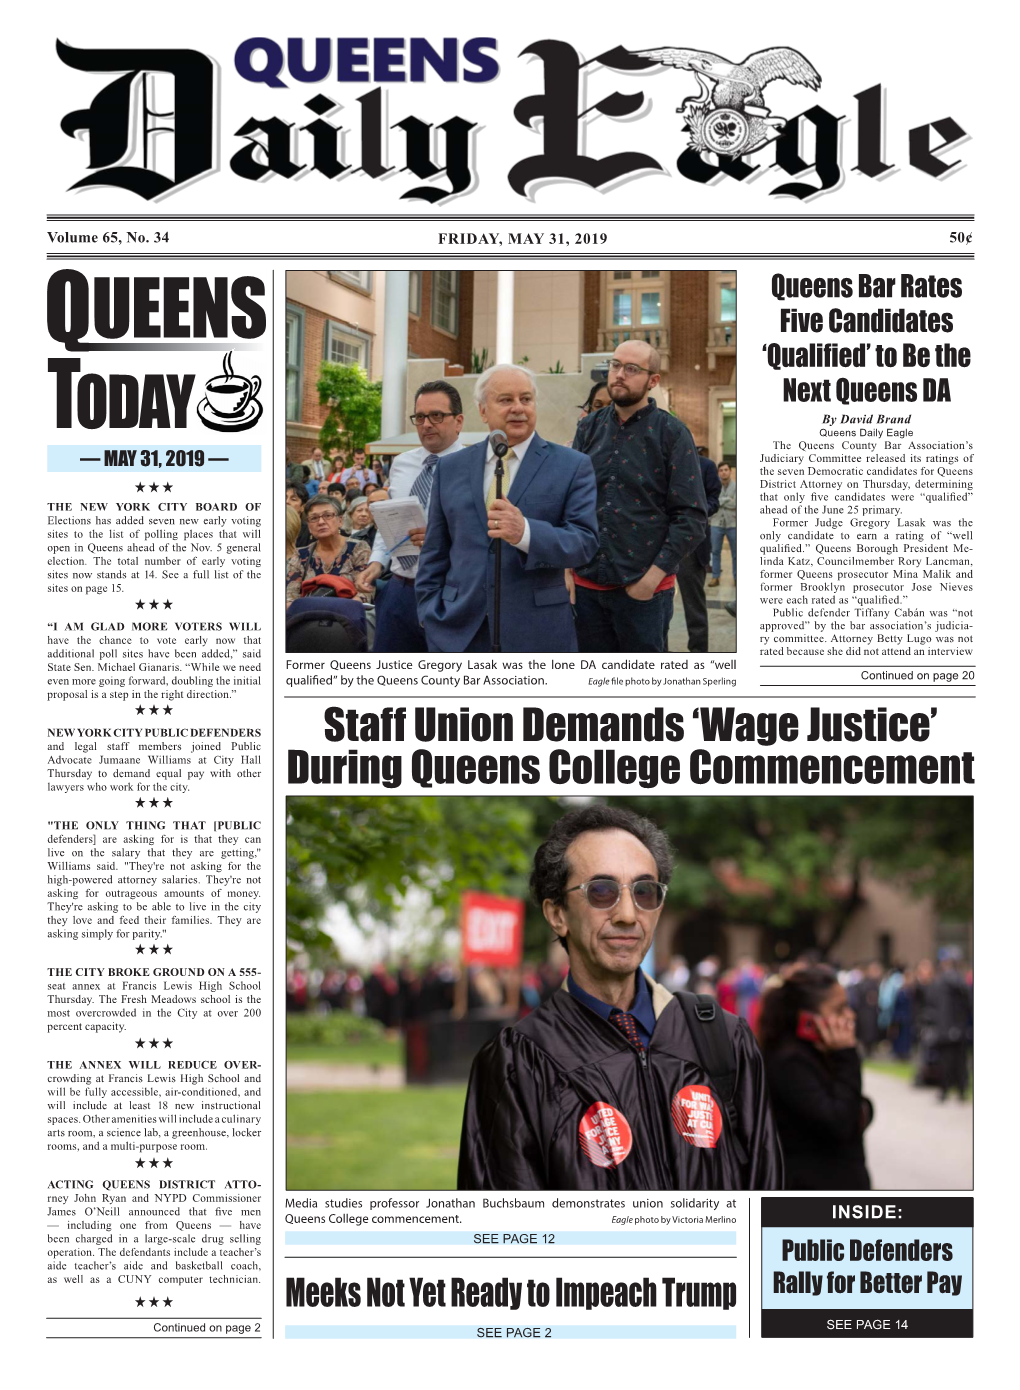 Staff Union Demands 'Wage Justice' During Queens College